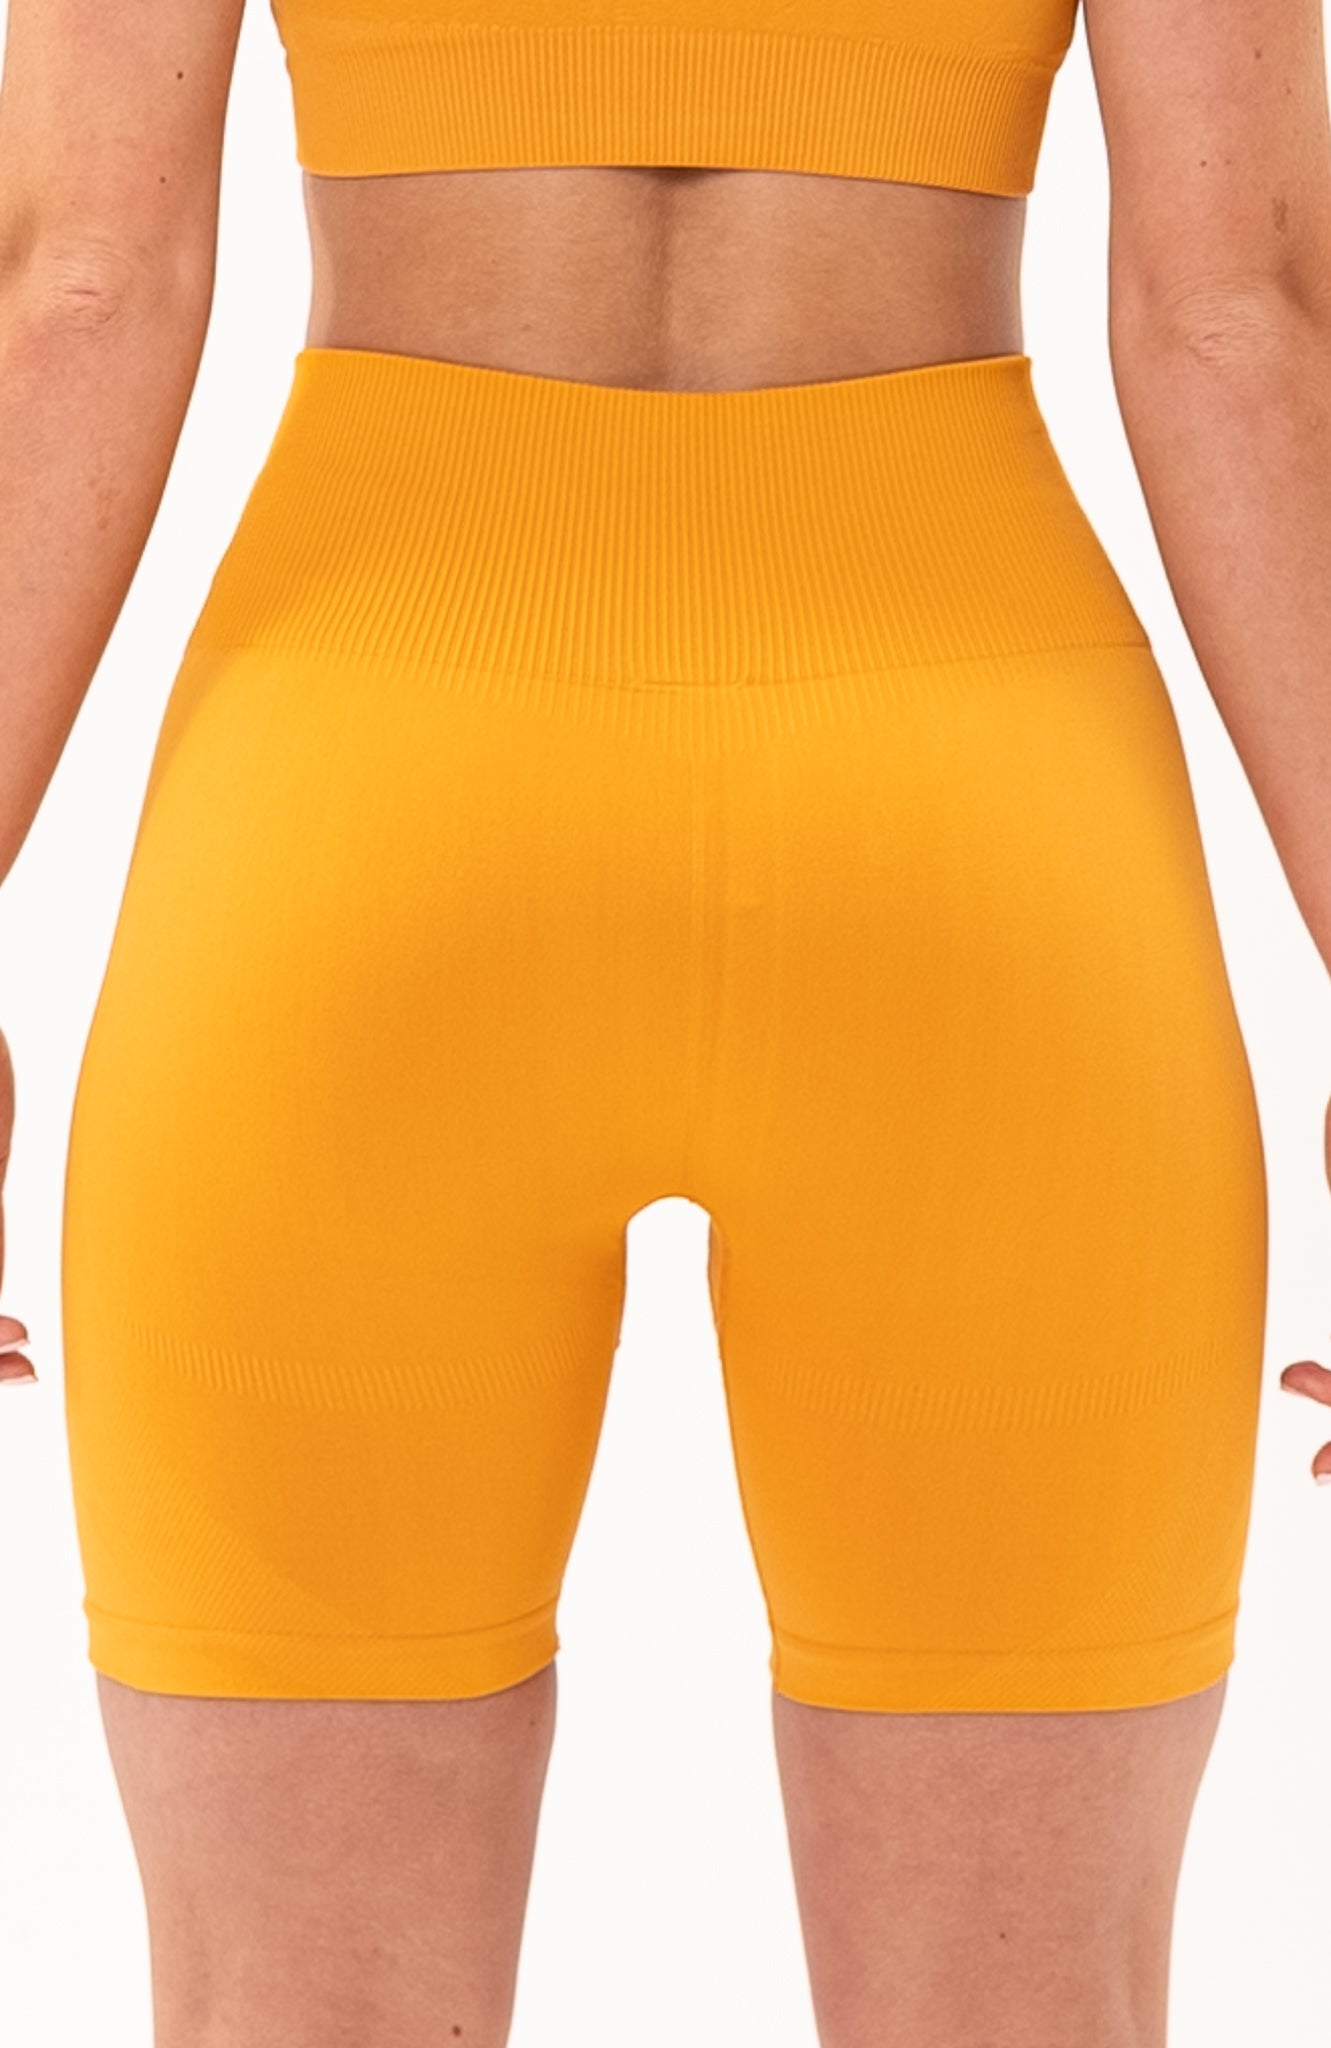 redbaysand Women's seamless Limitless high waisted cycle shorts in orange – Squat proof 5 inch inseam leg bum enhancing shorts for Gym workouts training, Running, yoga, bodybuilding and bikini fitness.